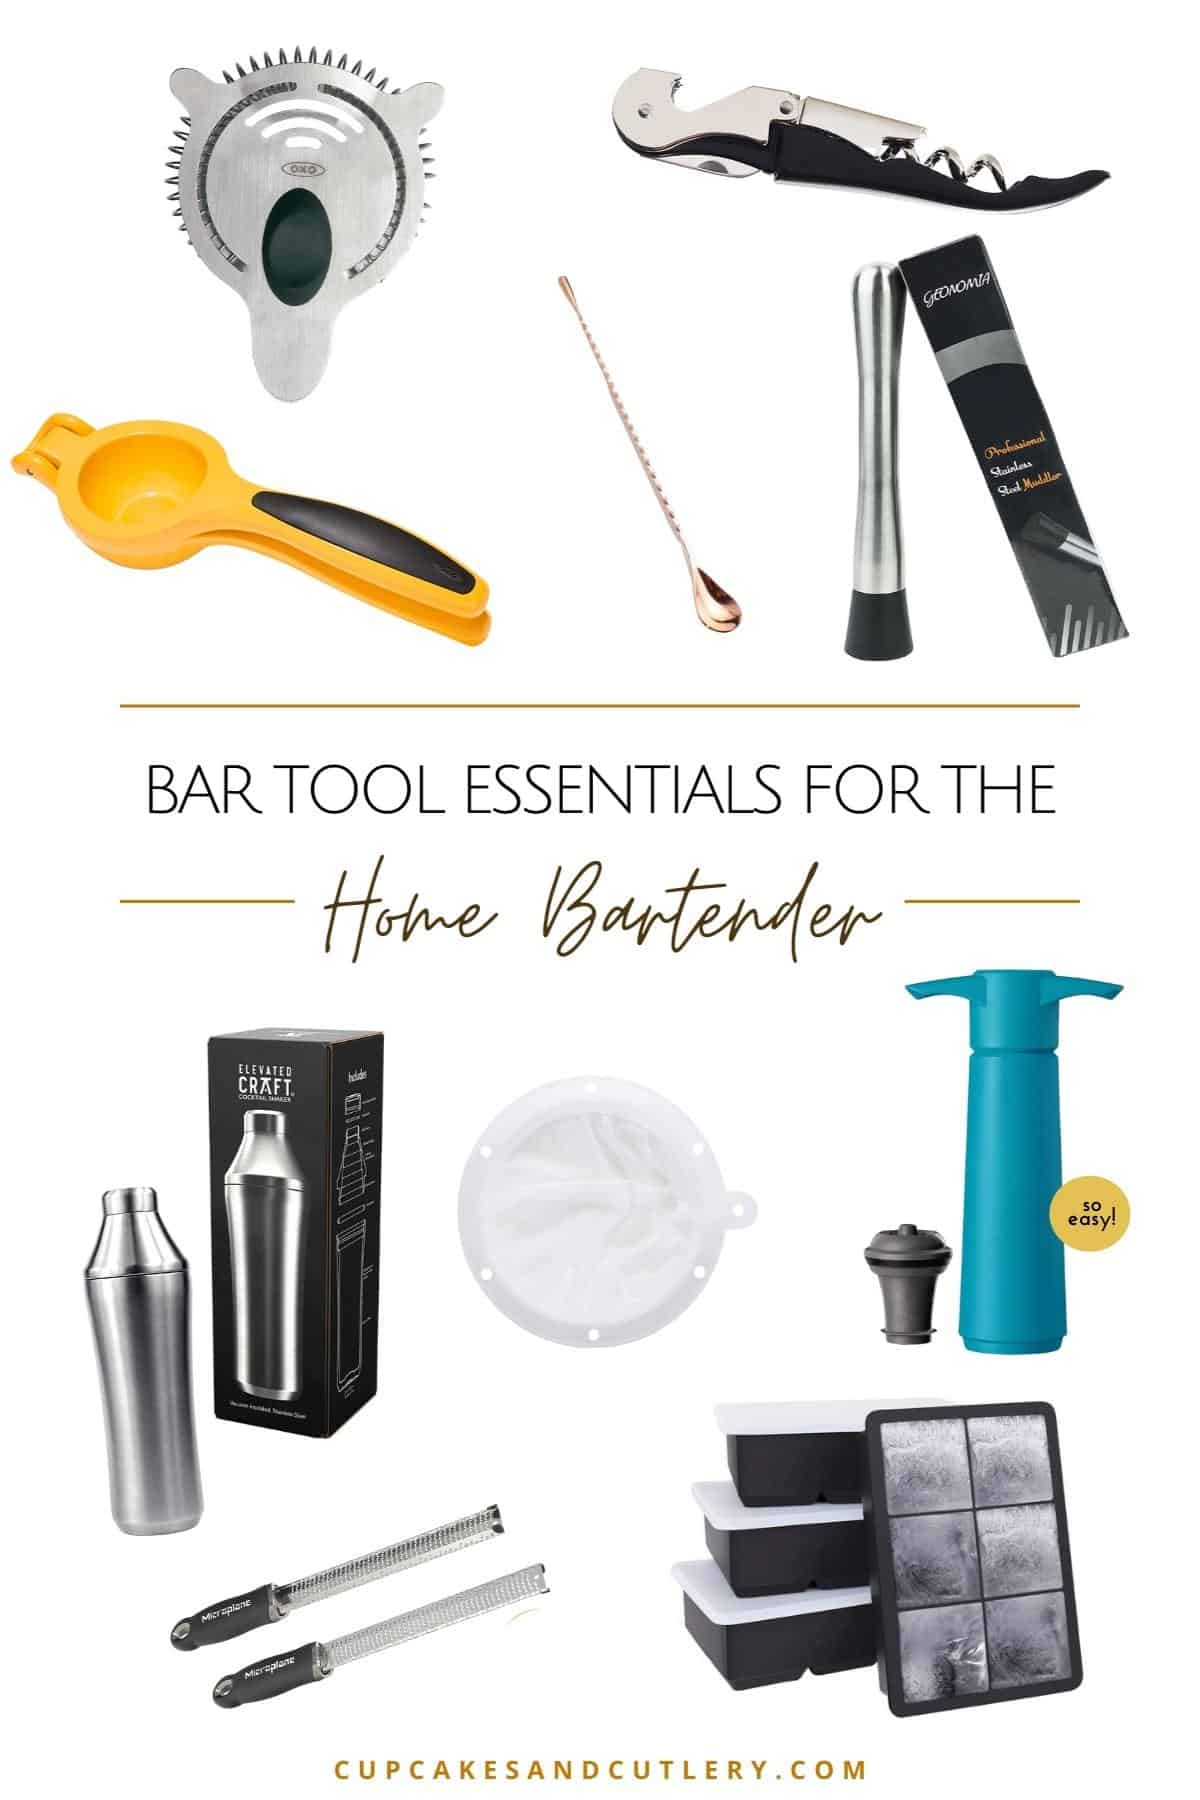 Collage of must have bar tools for mixing drinks at home.